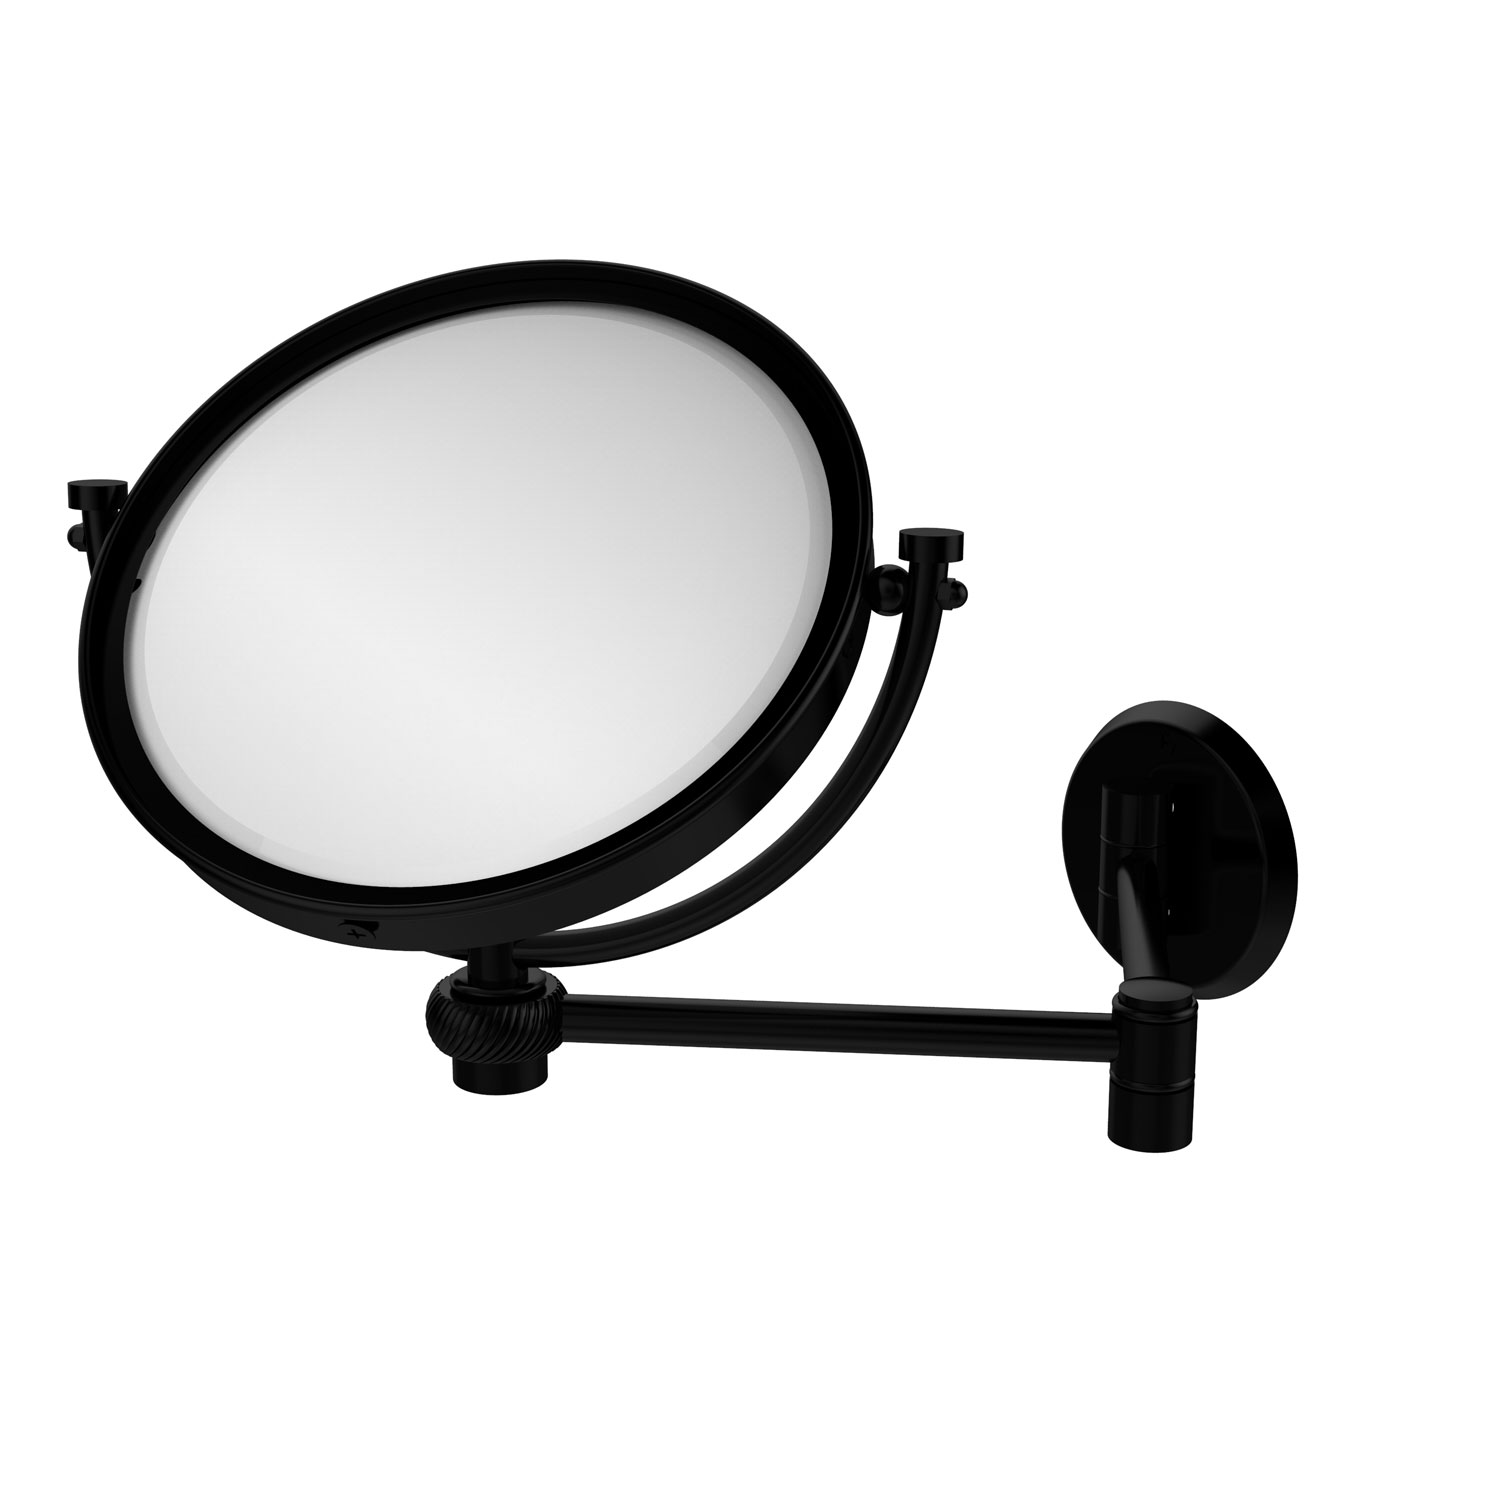 8 Inch Wall Mounted Extending Make-Up Mirror 3X Magnification With Twist Accent, Matte Black